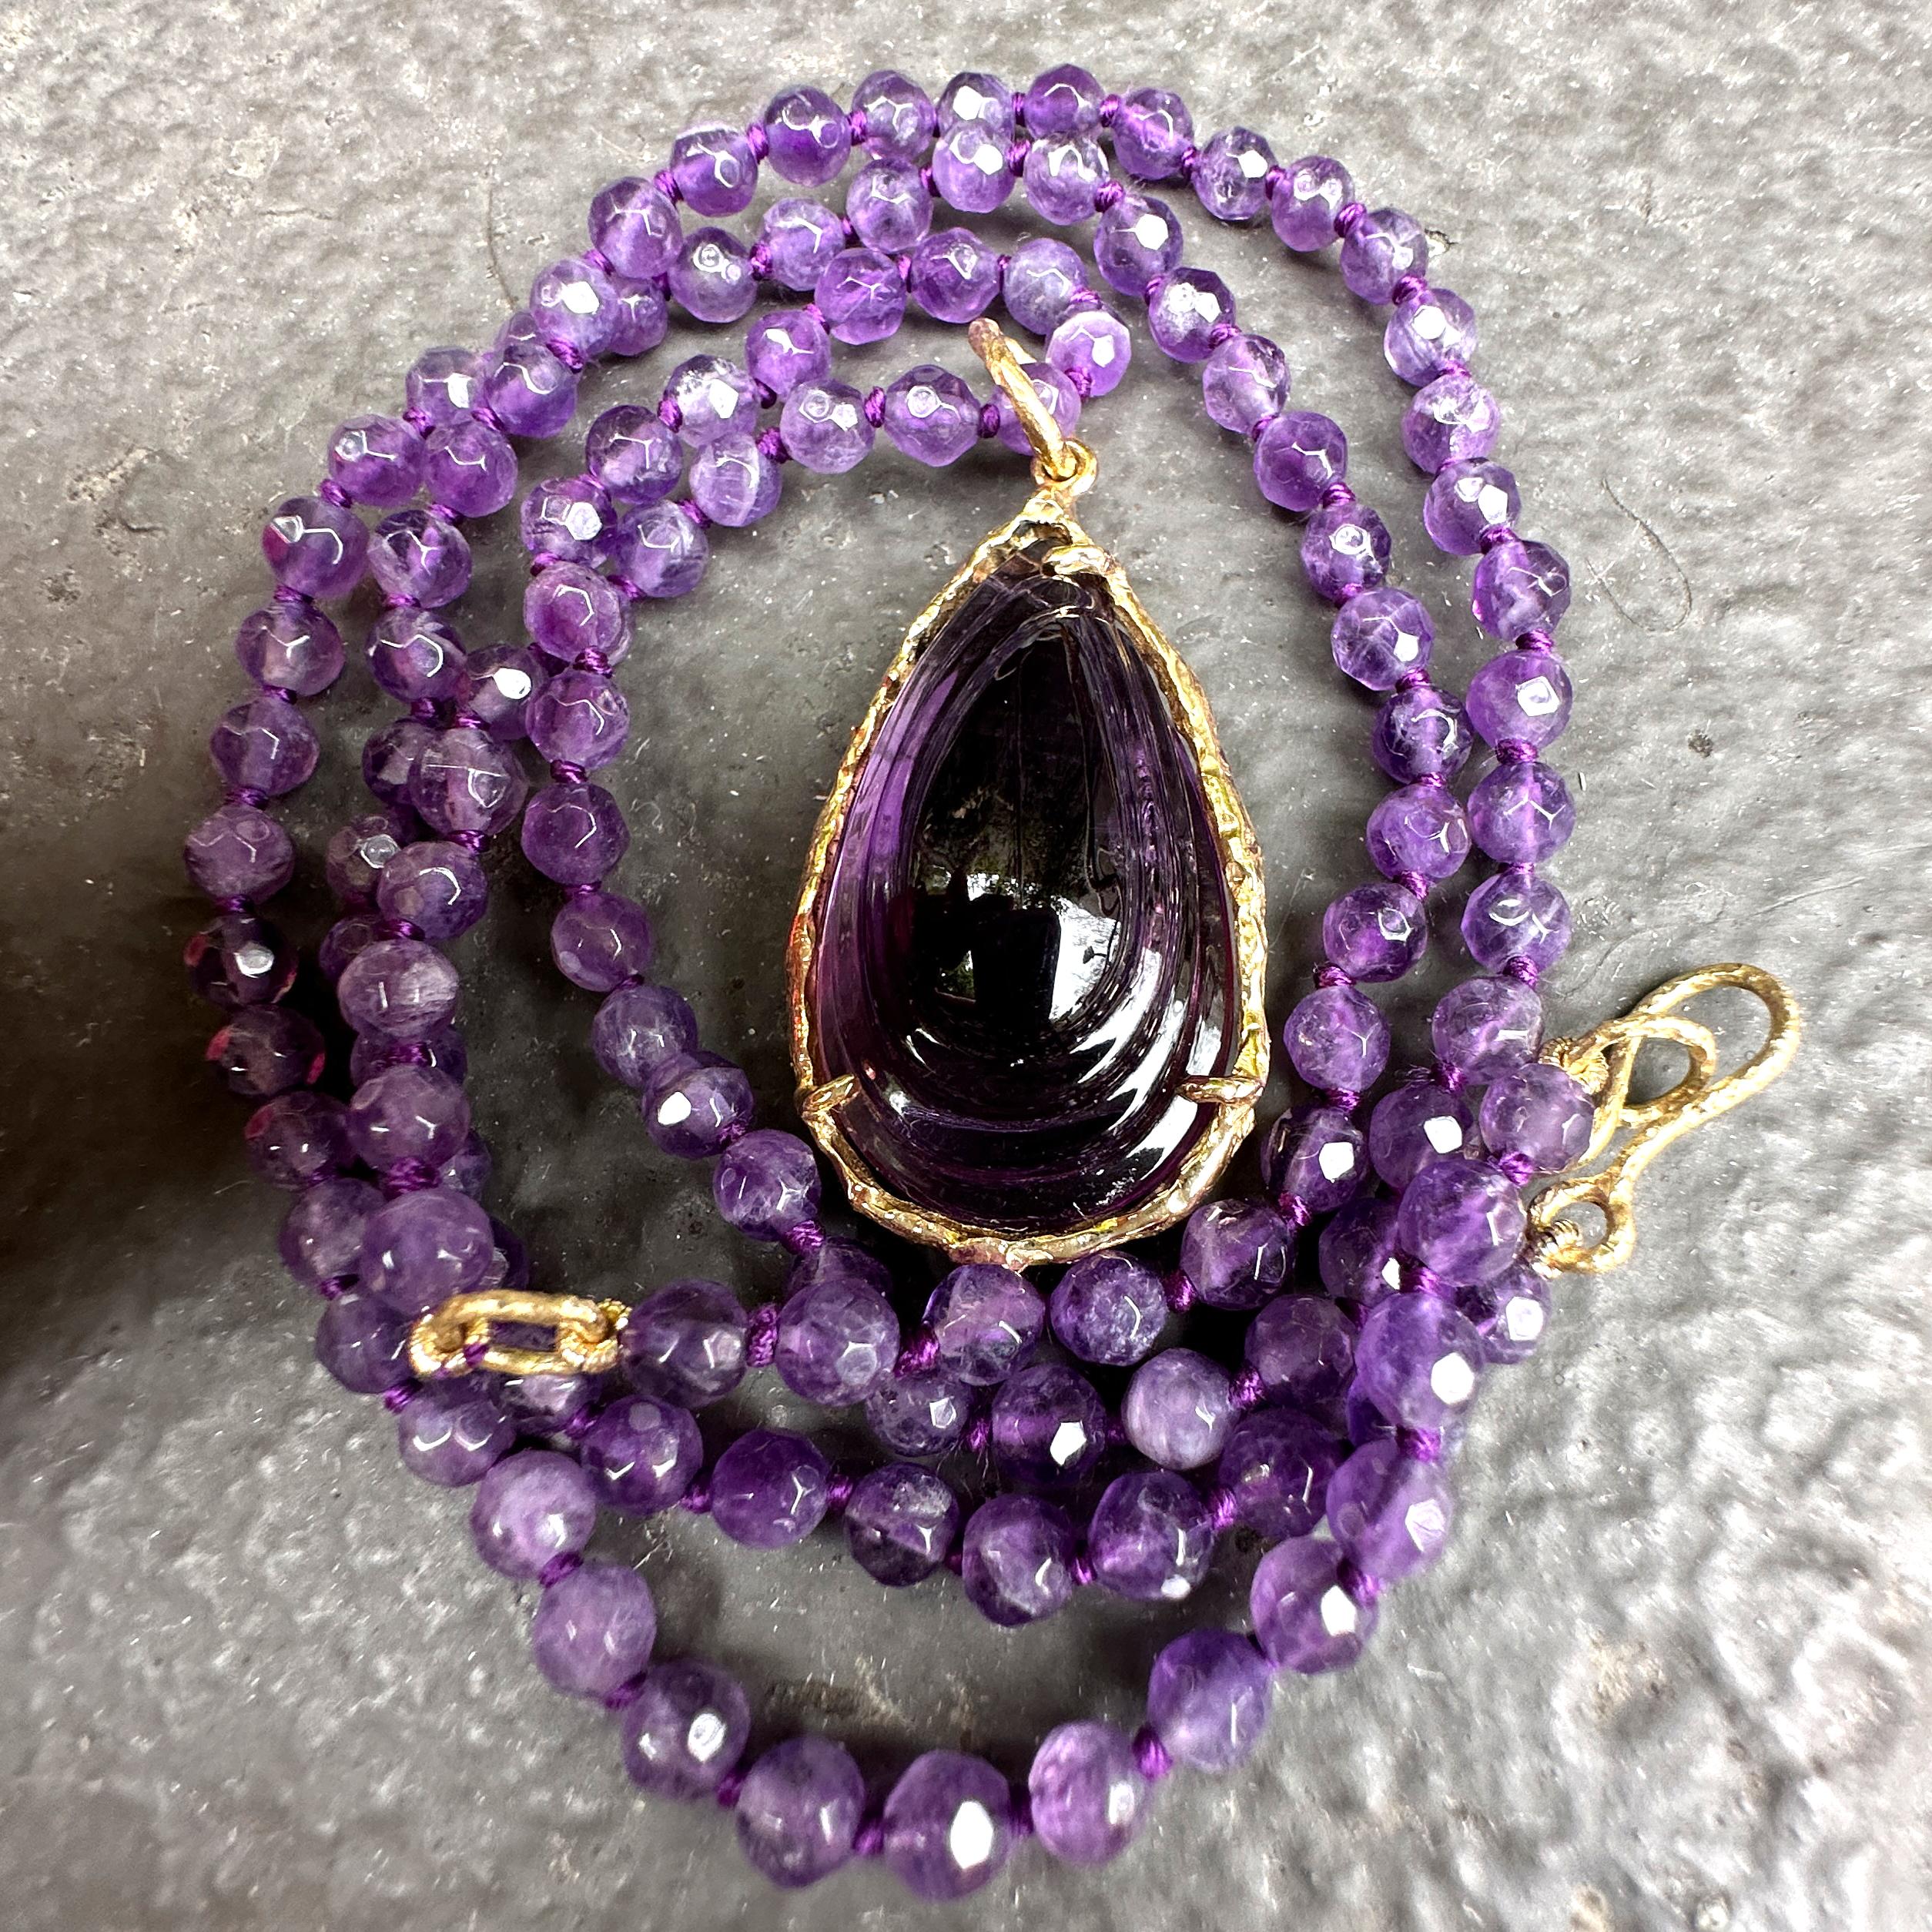 39 Carat Carved Amethyst Pendant in 18K Gold on Convertible Amethyst Bead Chain For Sale 8